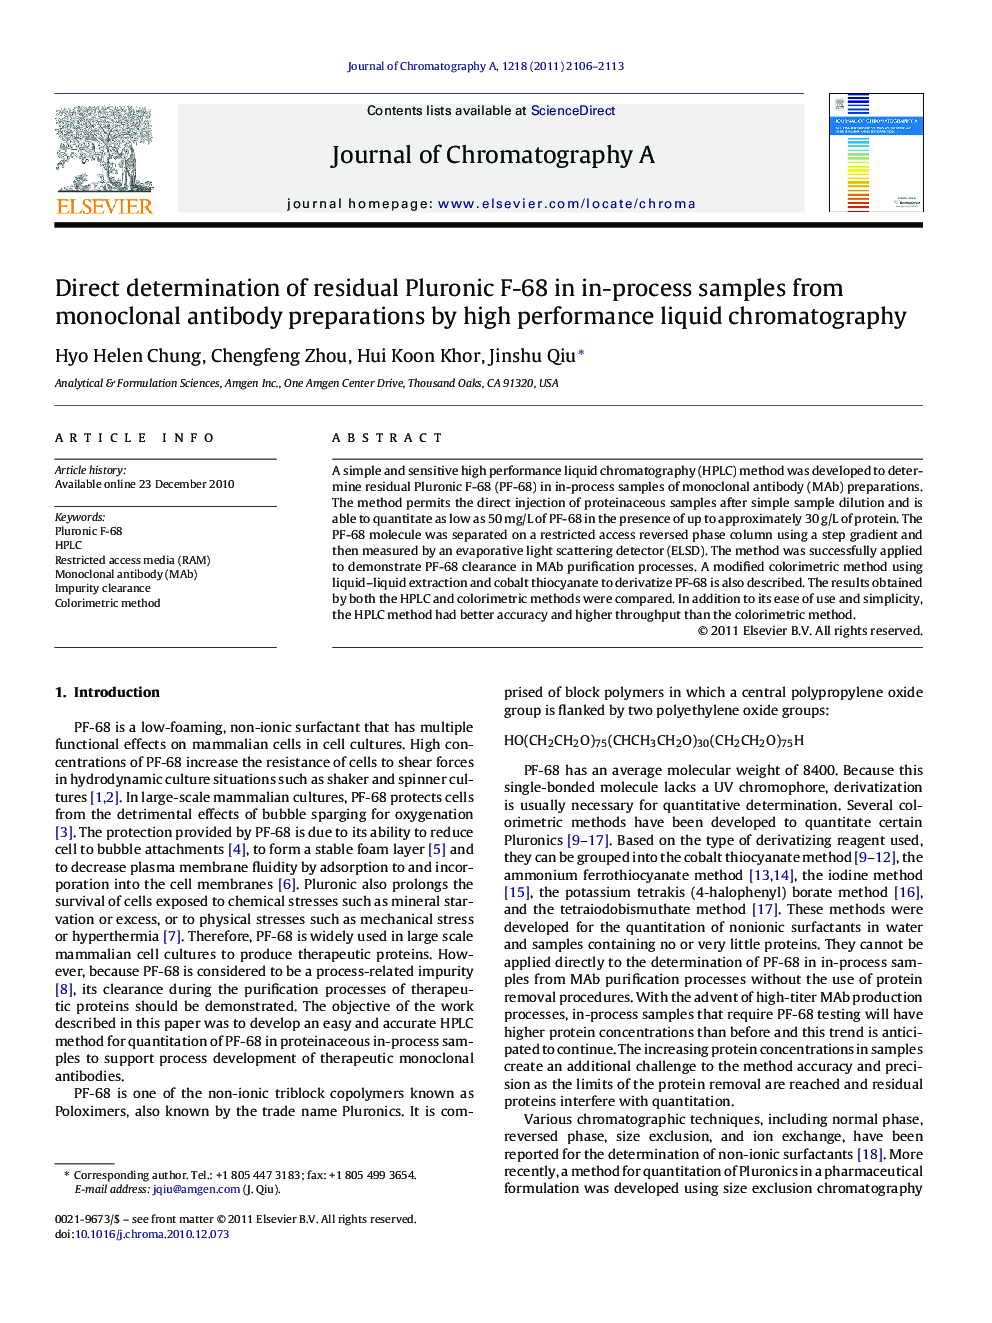 Direct determination of residual Pluronic F-68 in in-process samples from monoclonal antibody preparations by high performance liquid chromatography